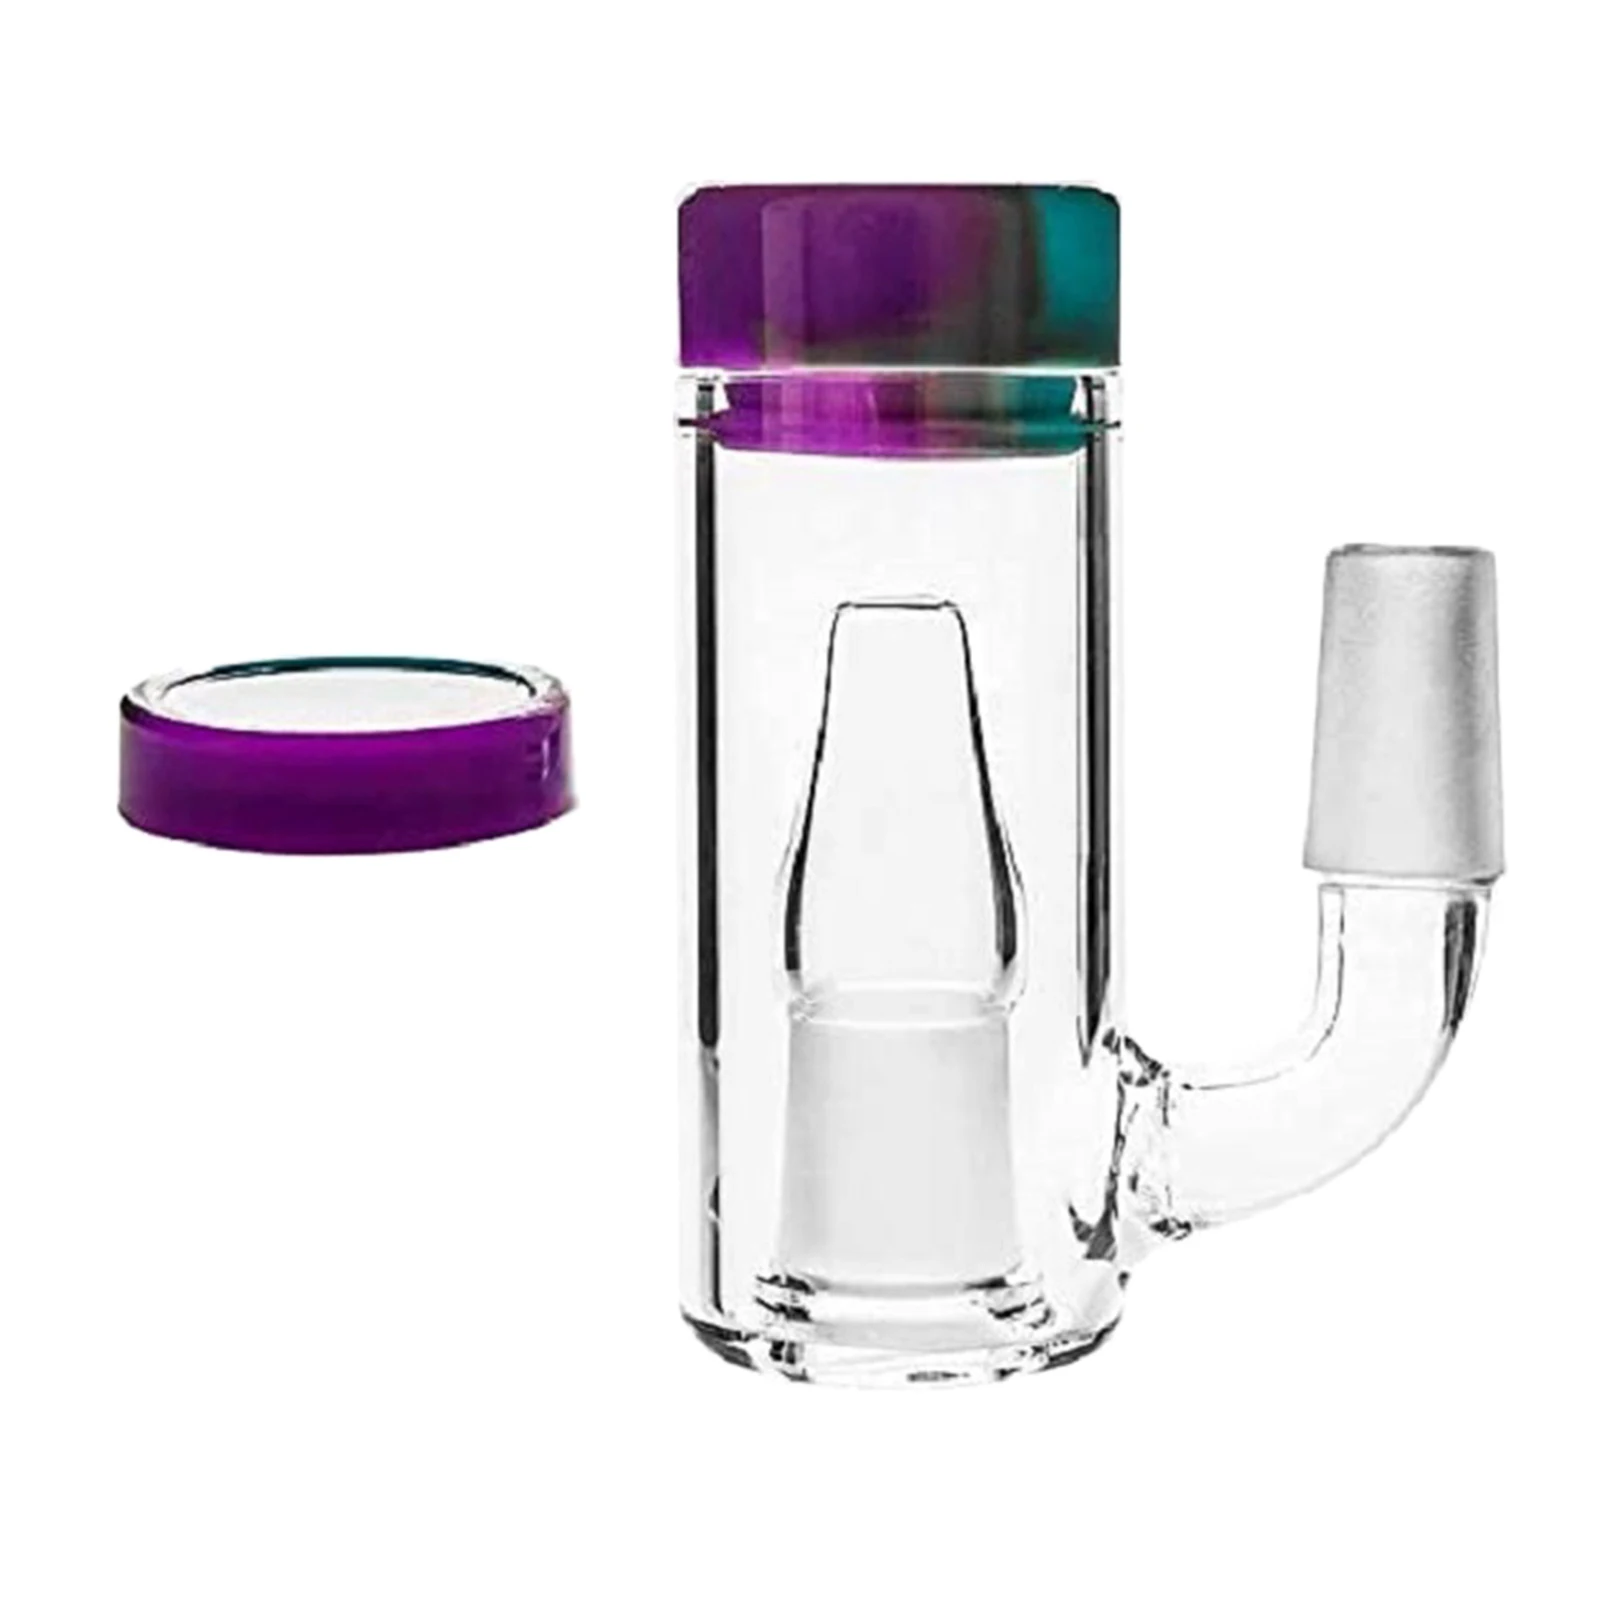 Glass Collector Silicone Container Kit with 14mm Male Connector, Reusable and Convenient